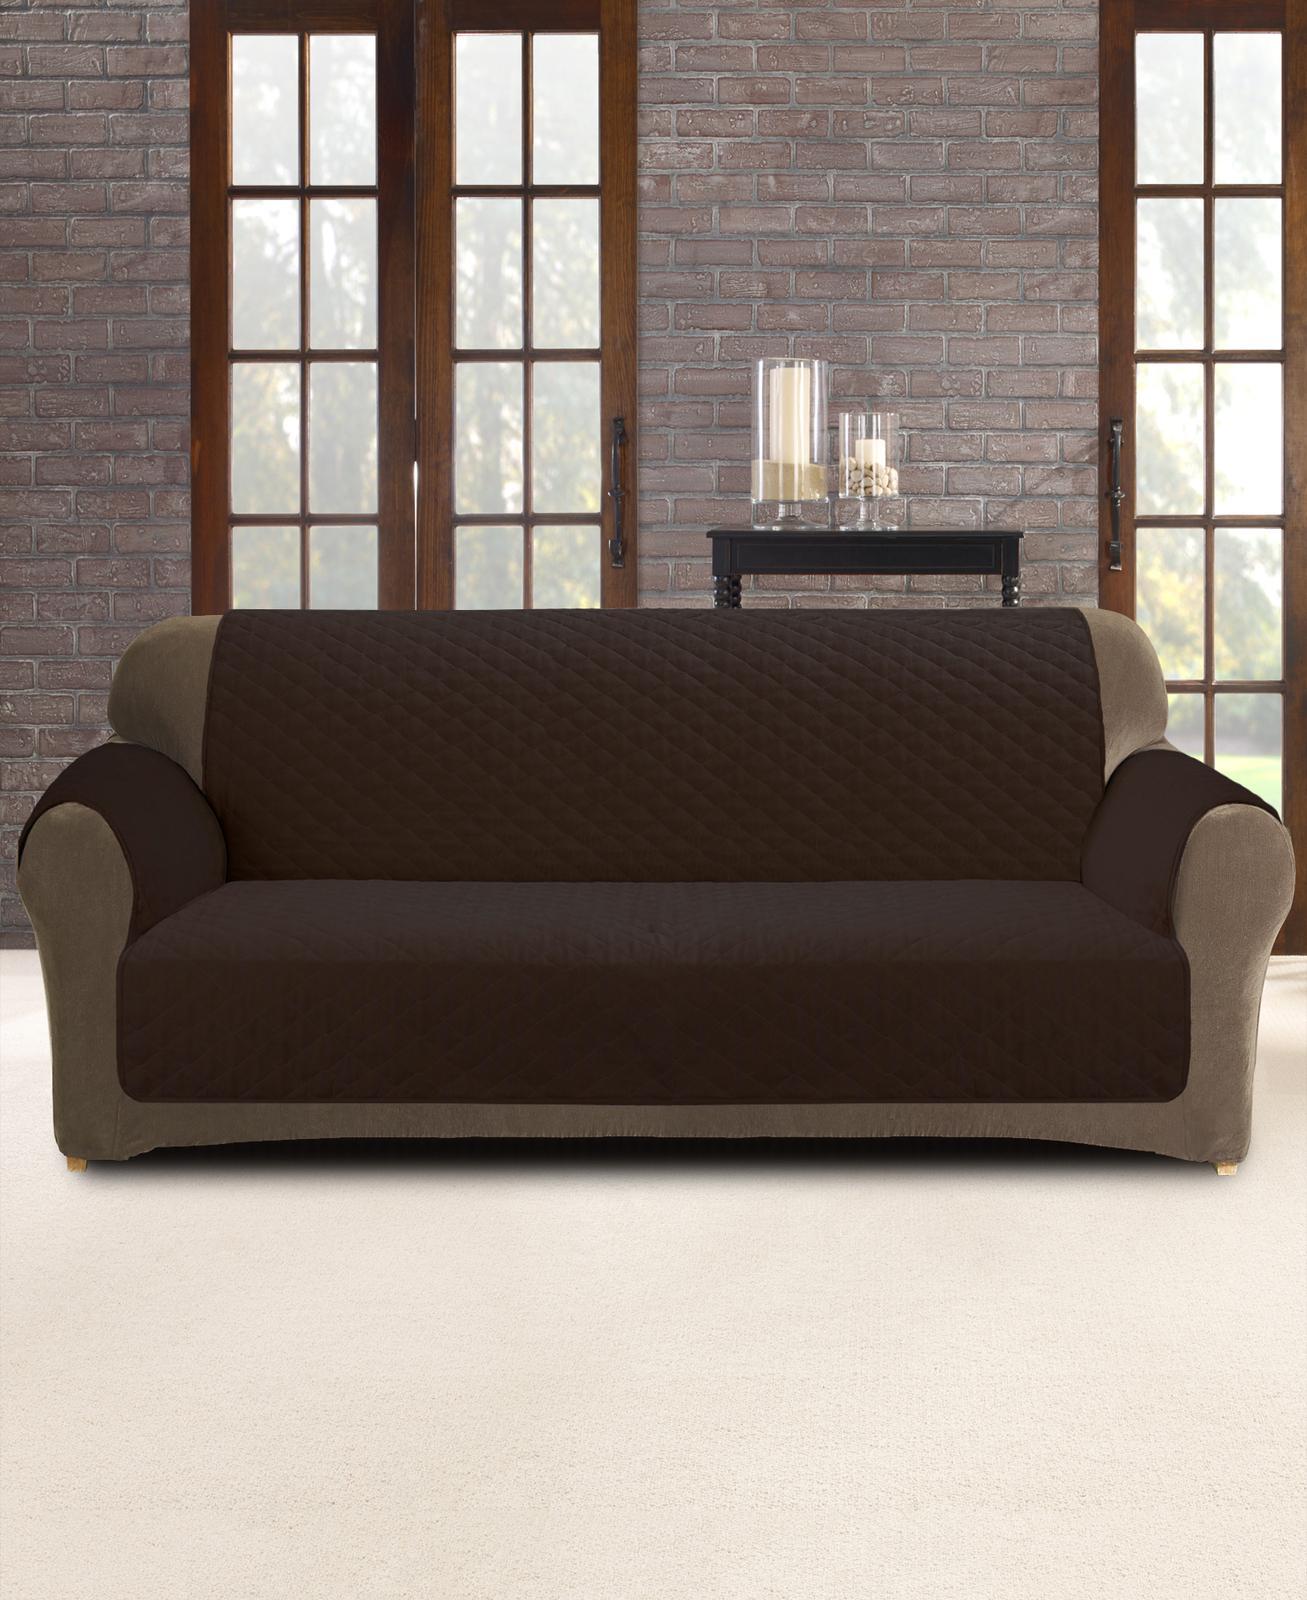 Custom Fit 2-Seater Sofa/Couch/Seat Home Lounge Cover Protector Slipcover Coffee